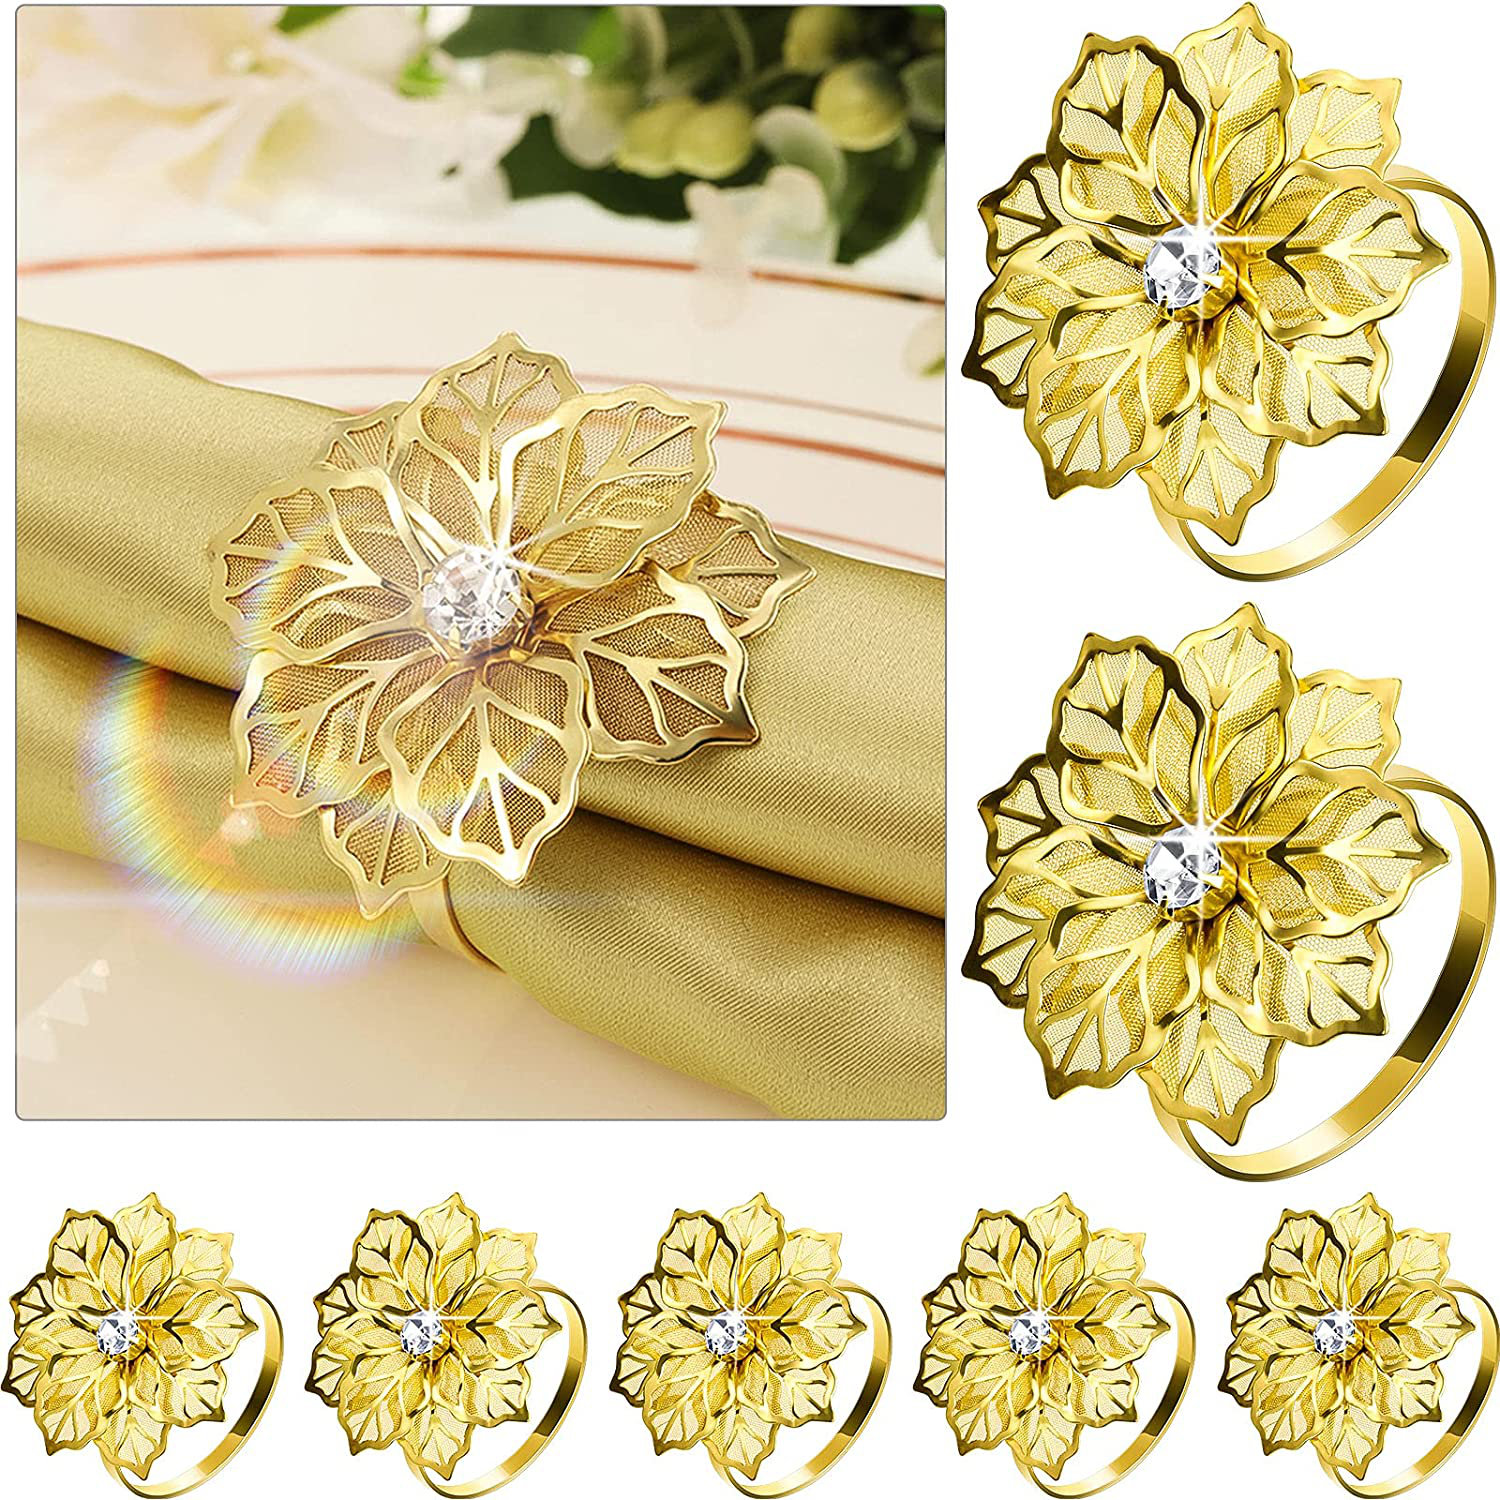 Gold TTOYOUU Set of 12 Alloy Napkin Rings with Hollow Out Flower for Wedding Banquet Christmas Dinner Decor Favor 